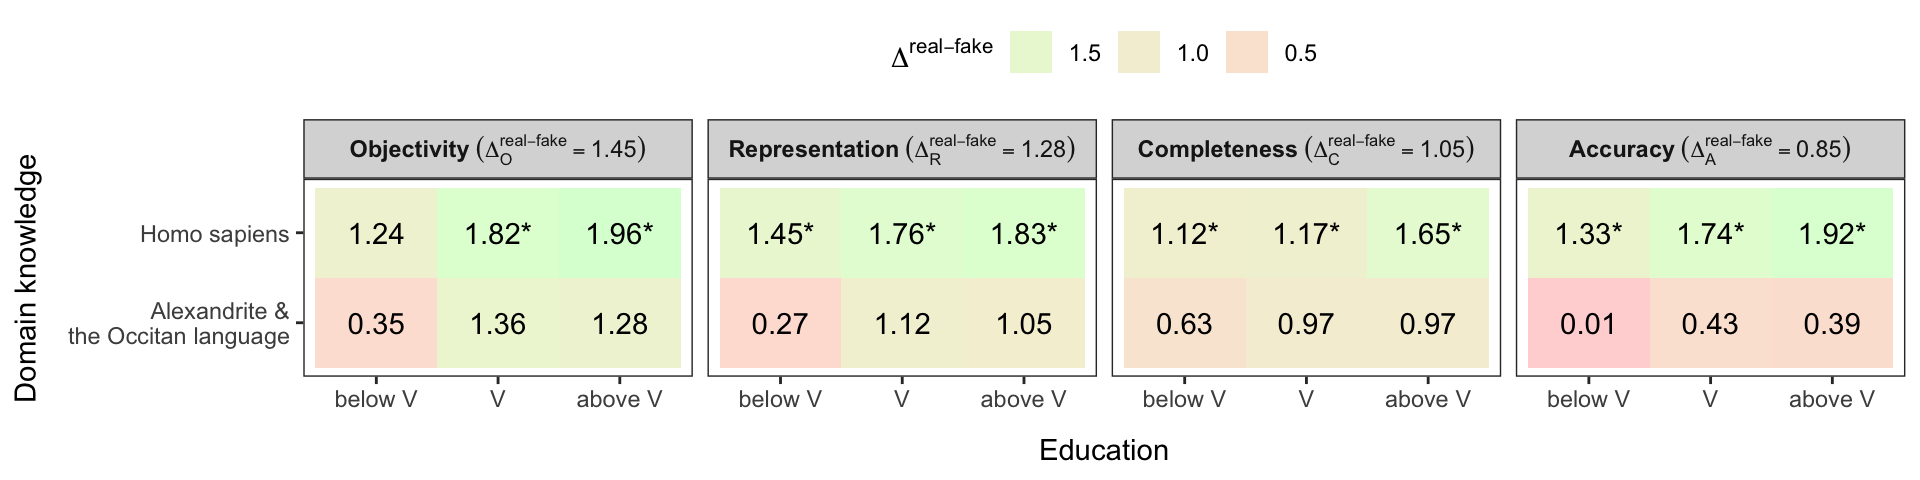 Influence of education and domain knowledge on identification of fake and real statement types. Domain knowledge includes two groups: Homo sapiens (well-known topic) and Alexandrite & the Occitan language (less-known topic). Education is grouped into below V (levels 0–3, from early childhood, primary, to lower and and upper secondary education), V (level 4, post-secondary non-tertiary education) and above V (levels 5–8, from short-cycle tertiary, Bachelor’s, Master’s to Doctoral education), according to the ISCED 2011 classification.